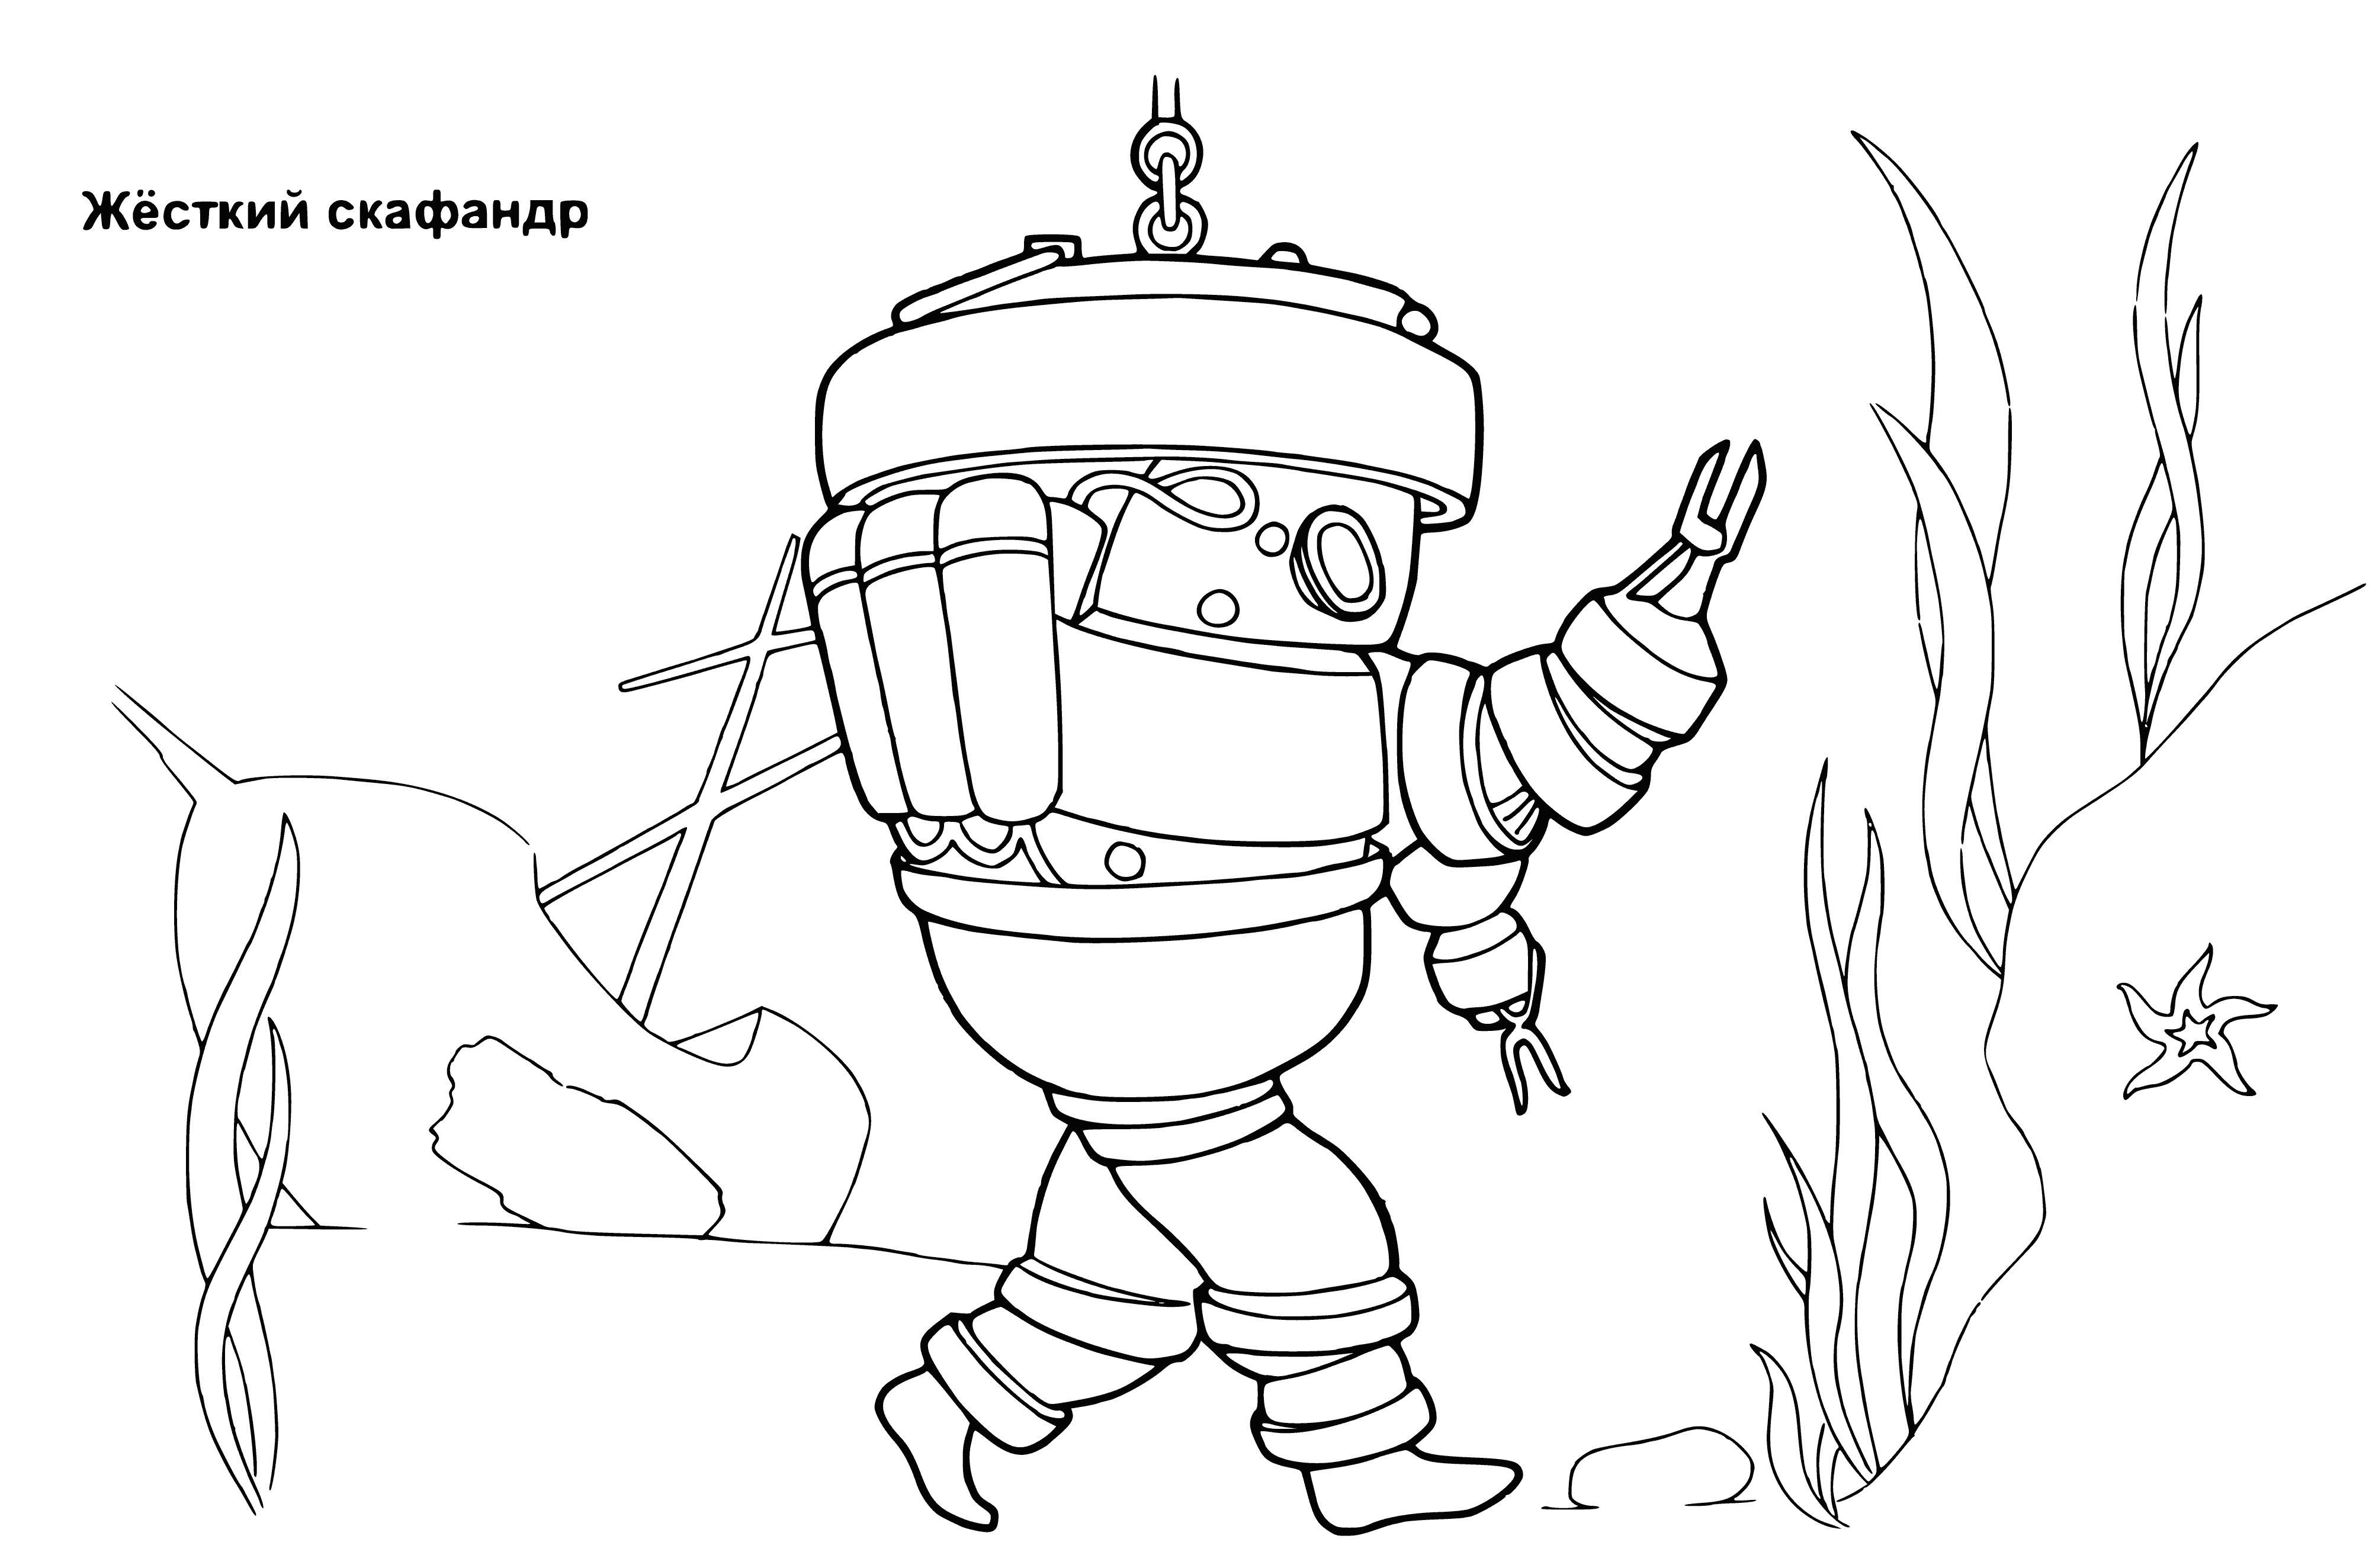 coloring page: Spacesuit designed for underwater vehicles is white with black visor; hoses, cords, and air-supplied backpack attached. #diving #technology